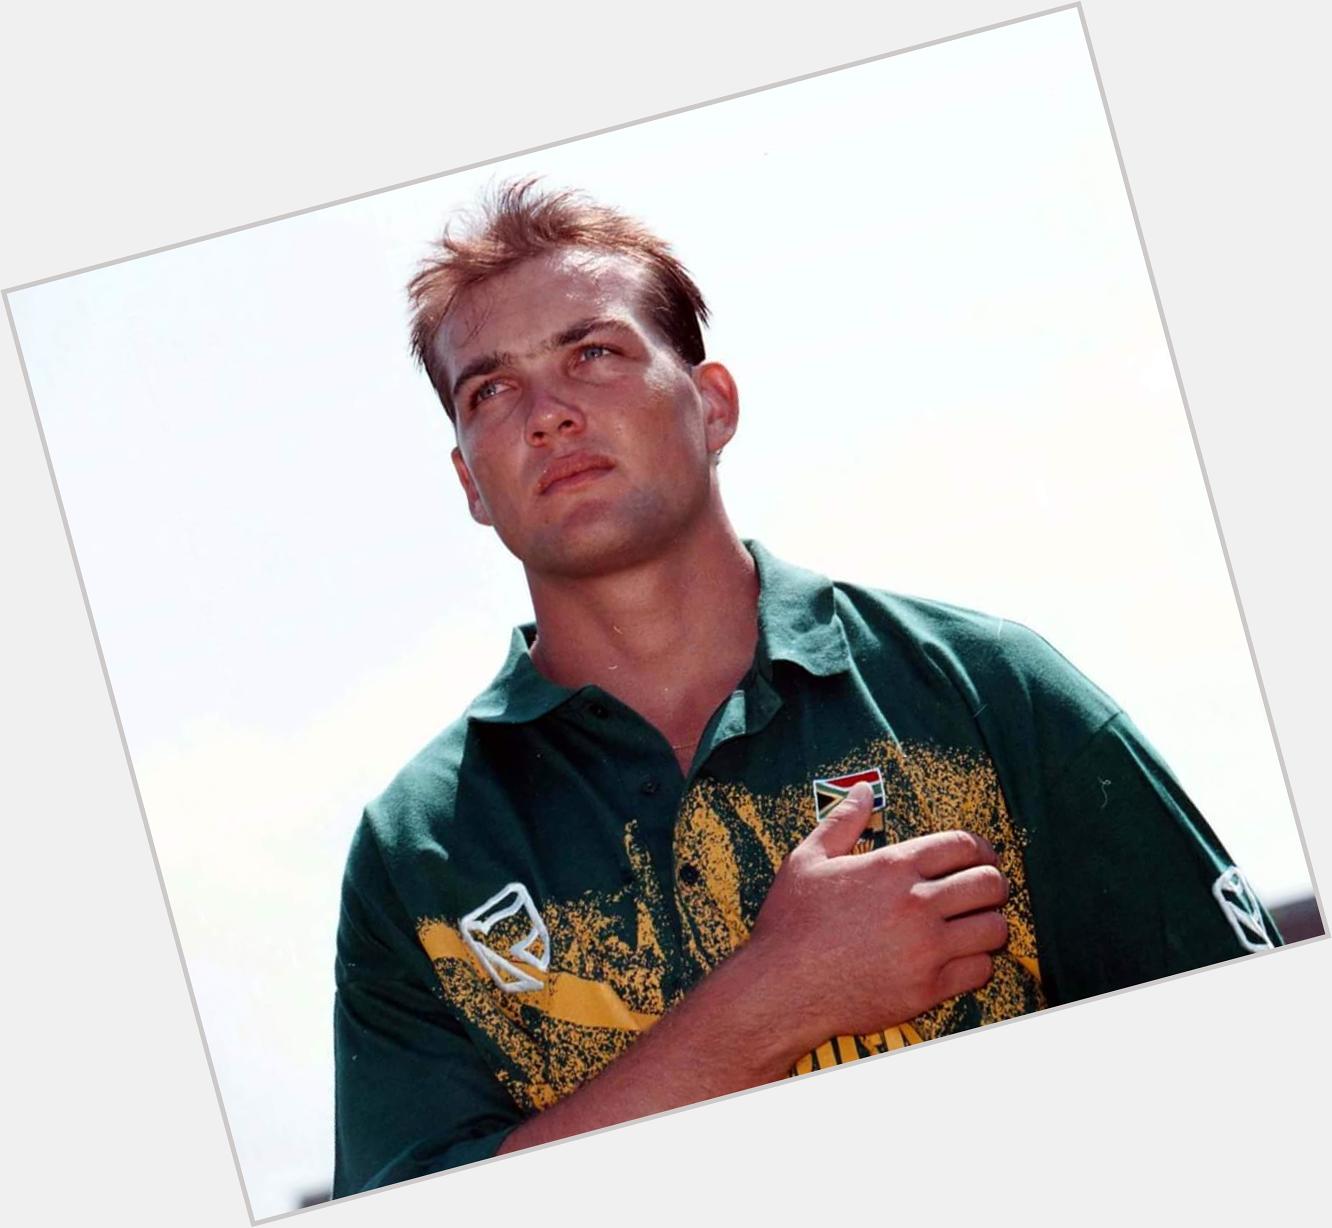 Happy birthday Jacques Kallis turns 40 today!
All the best for the year ahead. 